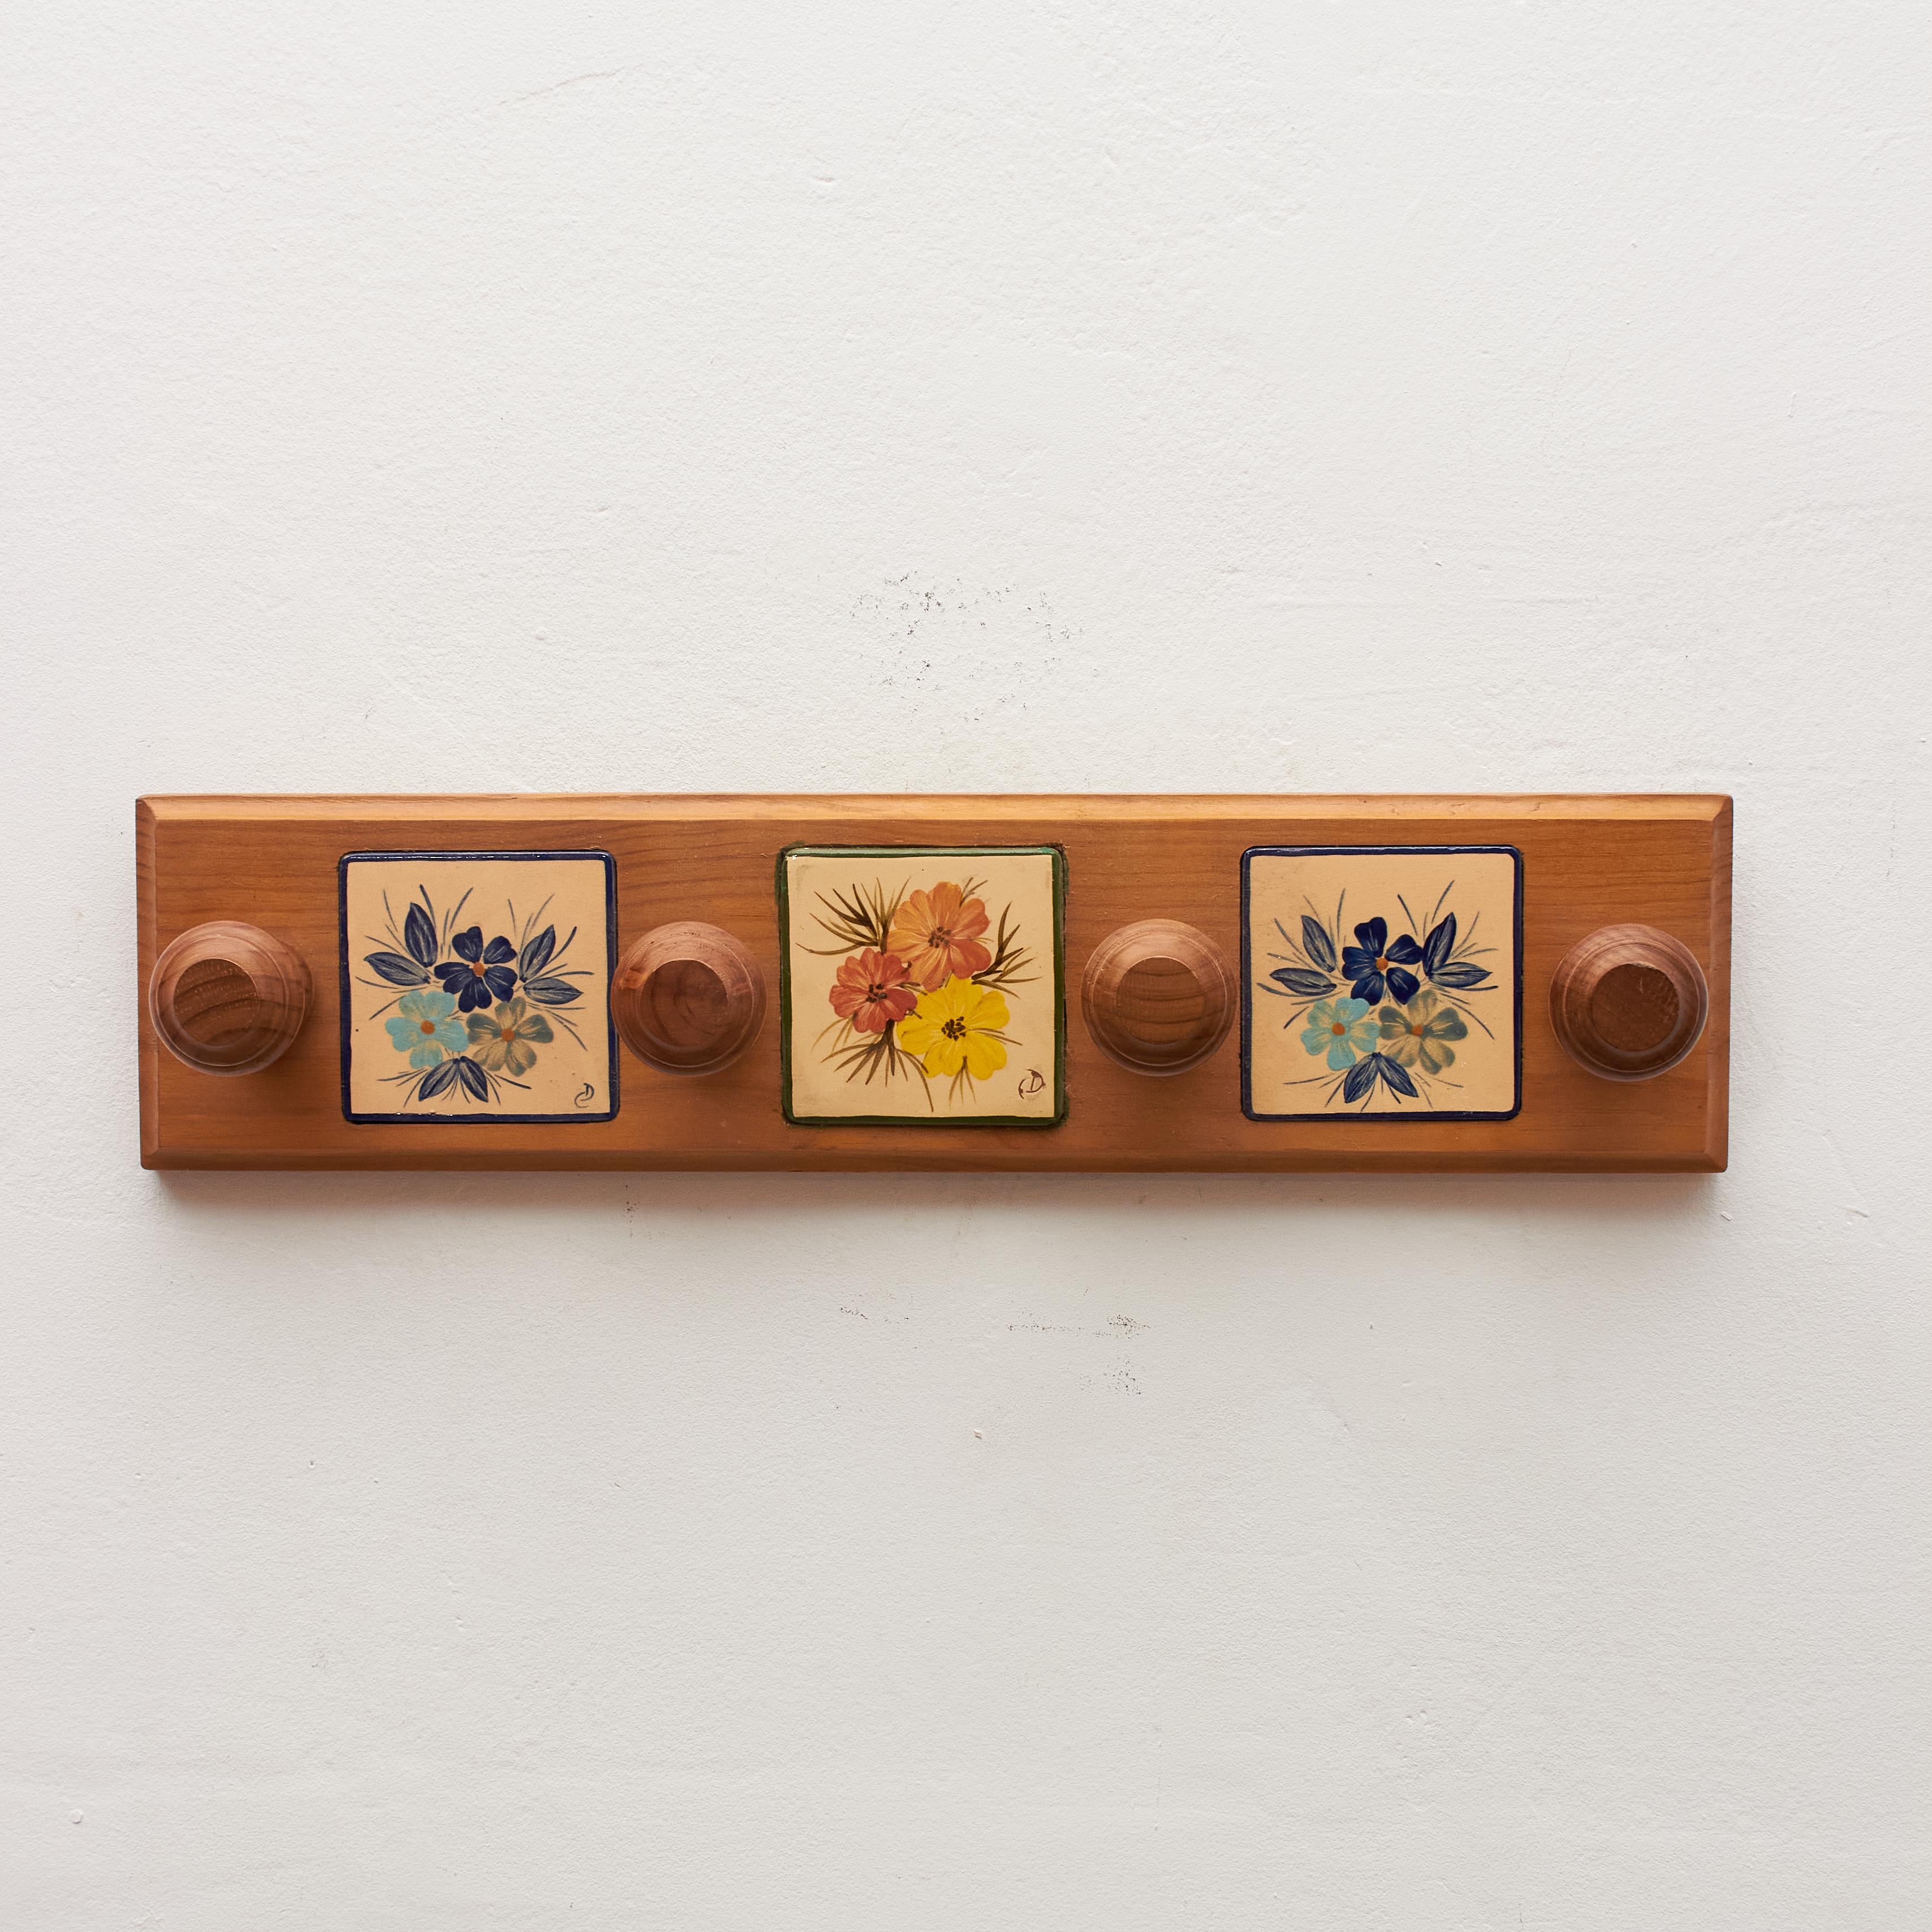 Elevate your space with the timeless craftsmanship of Catalan artist Diaz Costa through our vintage hand-painted ceramic and wood hanger, crafted around 1960 in Spain. This traditional piece is a testament to Diaz Costa's artistic flair, blending